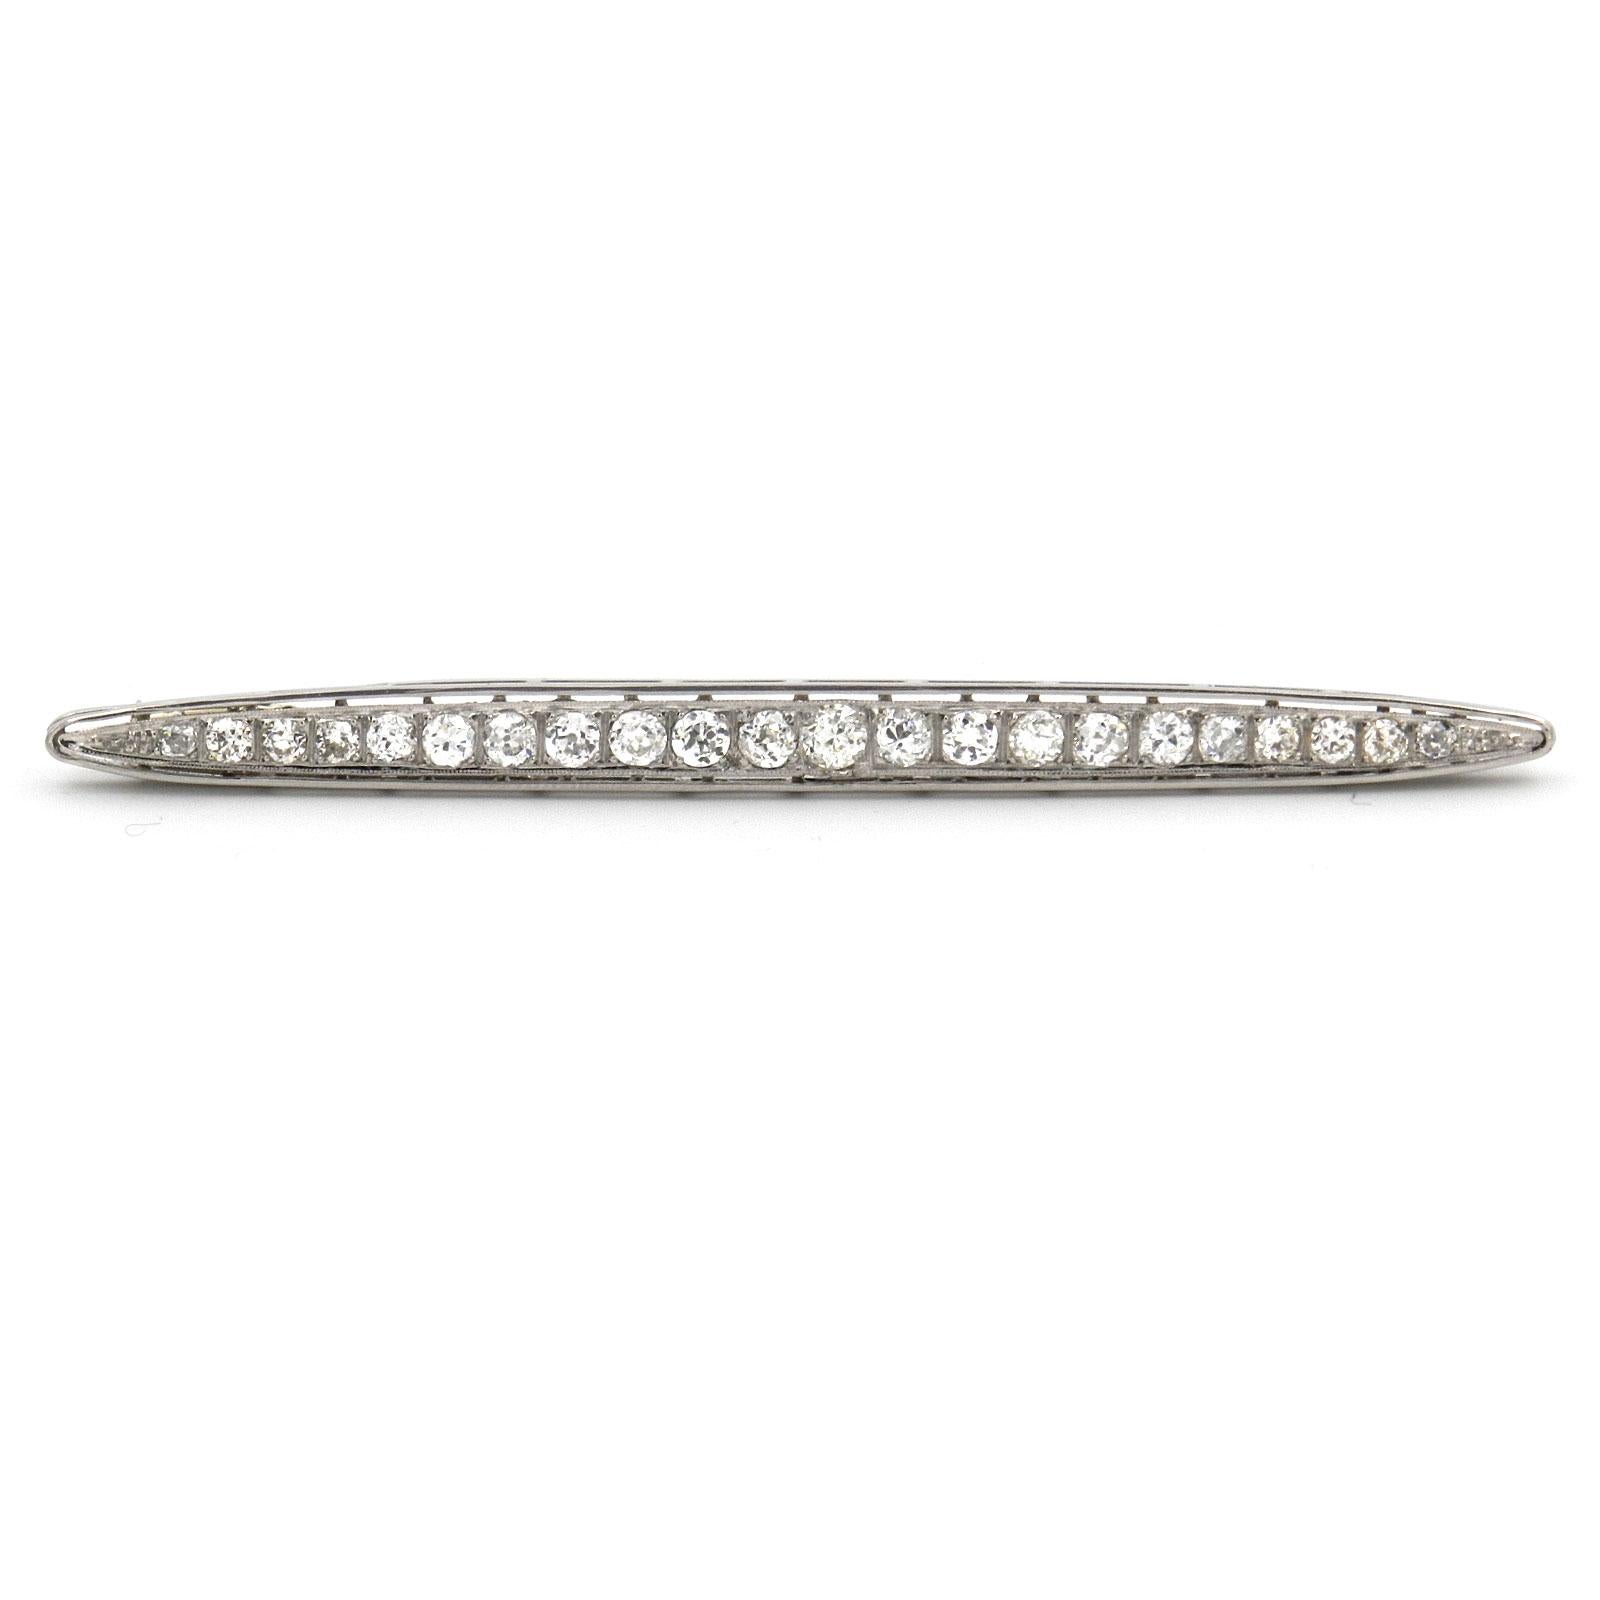 Art Deco 3 Carat Diamond 18K White Gold Bar Brooch Pin, circa 1930

Impressive 3,78 inch (9.6 cm) long diamond bar brooch in boat shape, set in a line of 22 diamonds with a total of 3.0 carat in old and transition cut, set in Platin, the pin is in